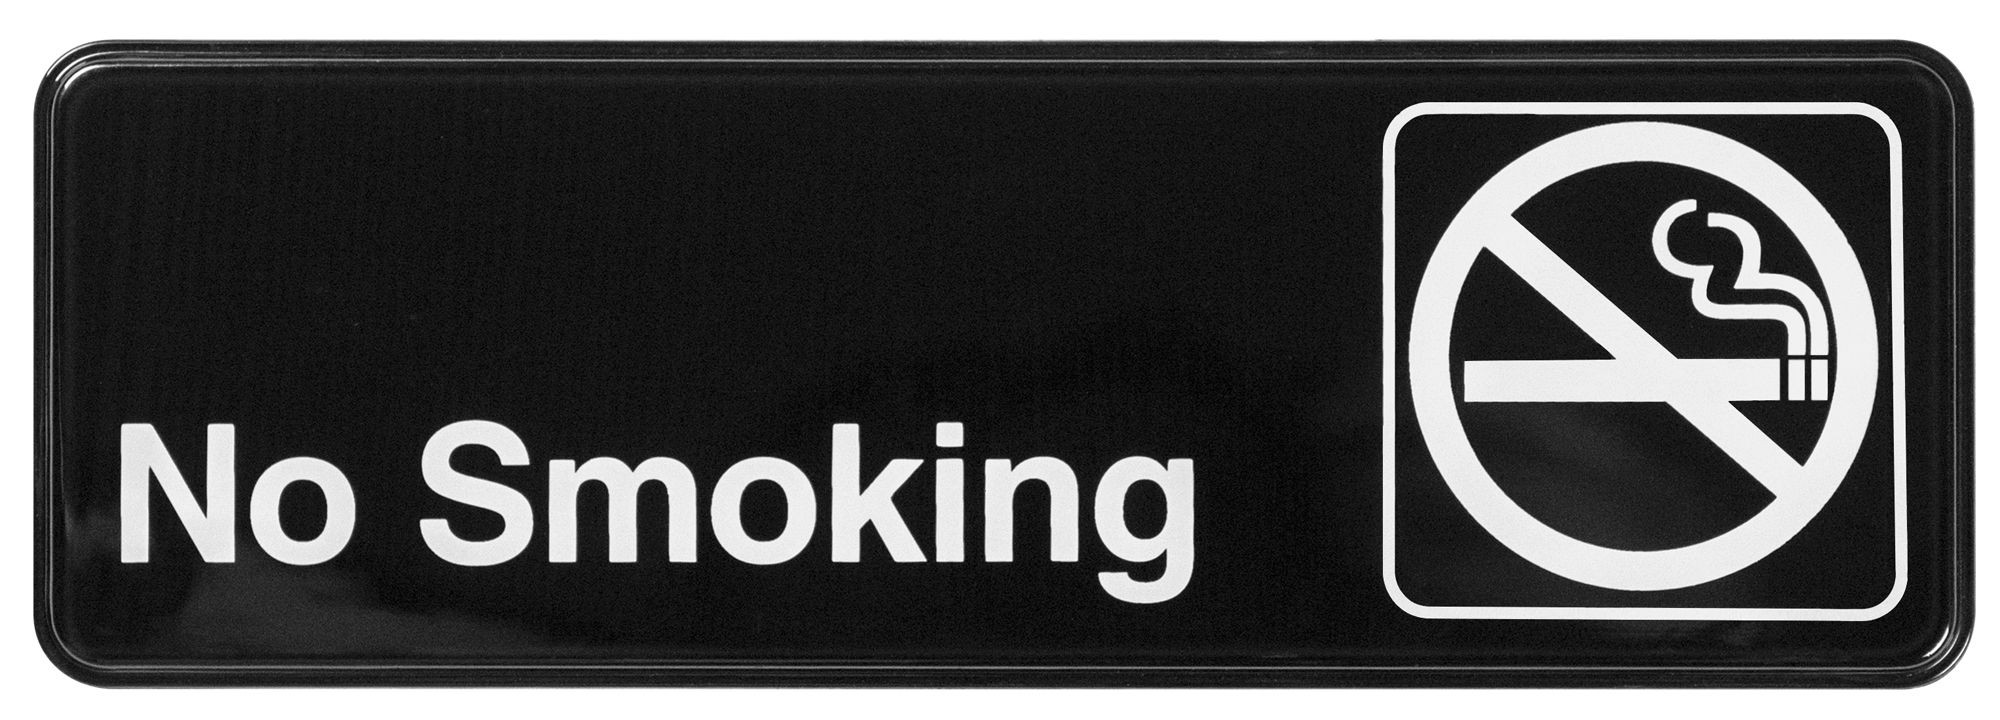 Winco SGN-310 "No Smoking" Informational Sign, 9" x 3"